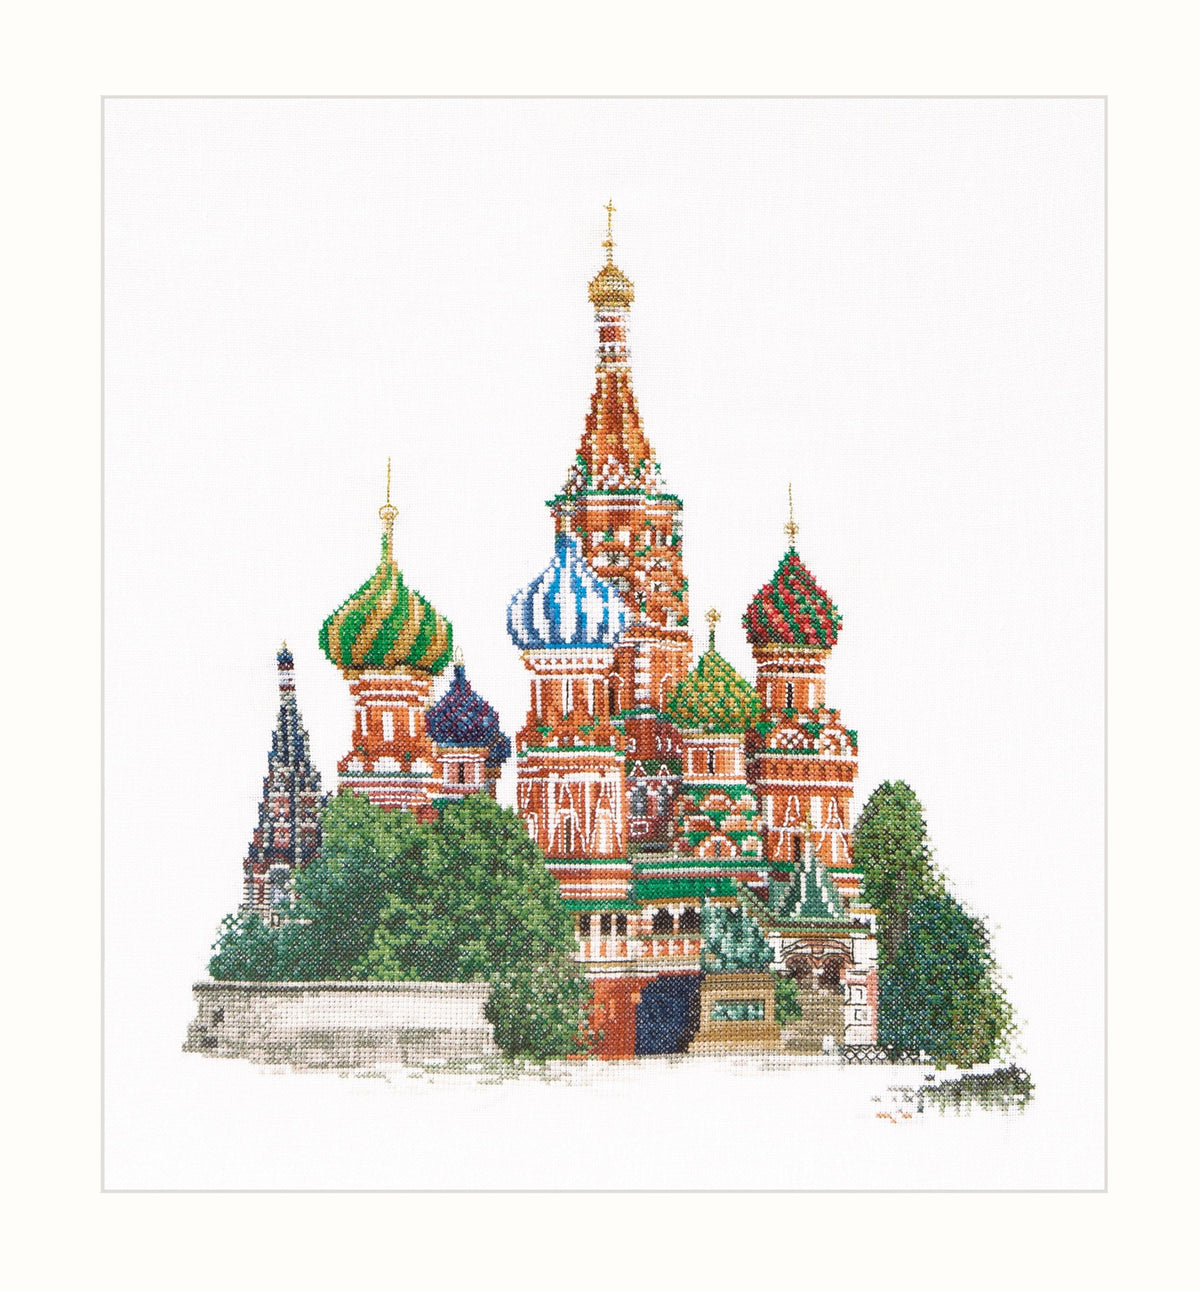 Thea Gouverneur - Counted Cross Stitch Kit - St. Basil's Cathedral Moscow Russia - Aida - 18 count - 513A - Thea Gouverneur Since 1959